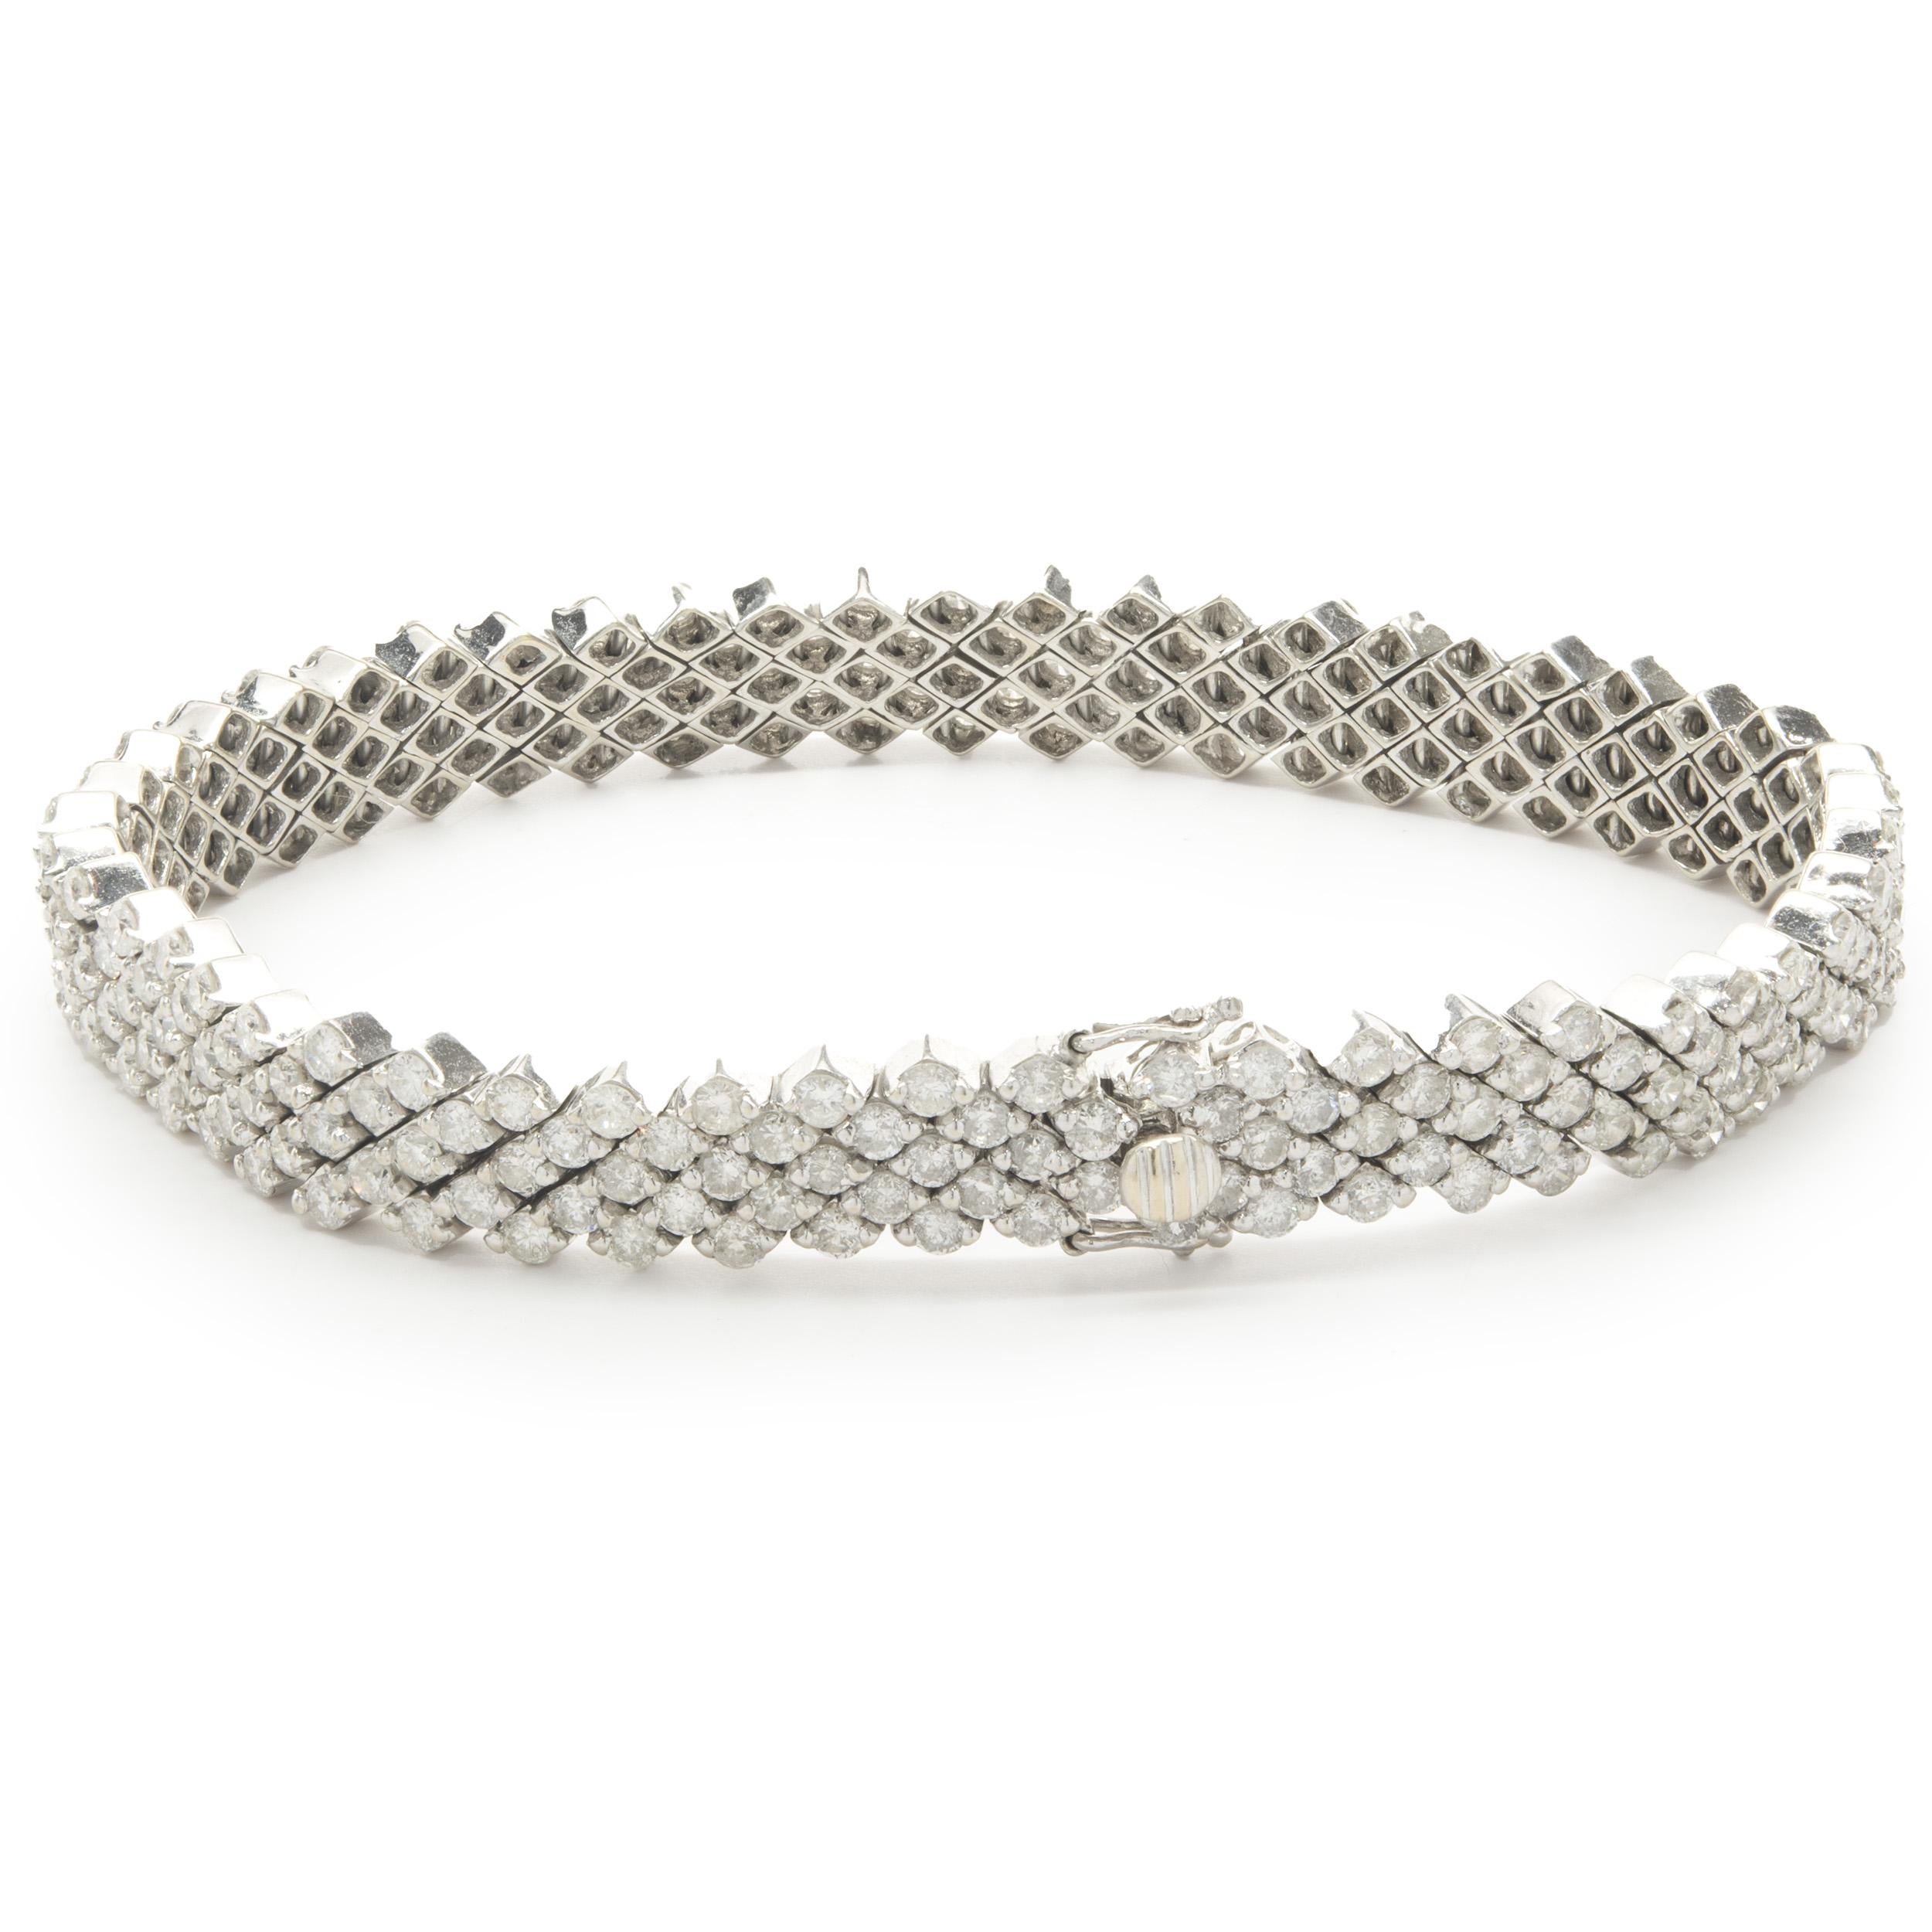 Designer: custom design
Material: 18K white gold
Diamond: round brilliant cut = 7.34cttw
Color: G  / H
Clarity: VS2
Dimensions: bracelet measures 7-inches in length
Weight: 20.53 grams